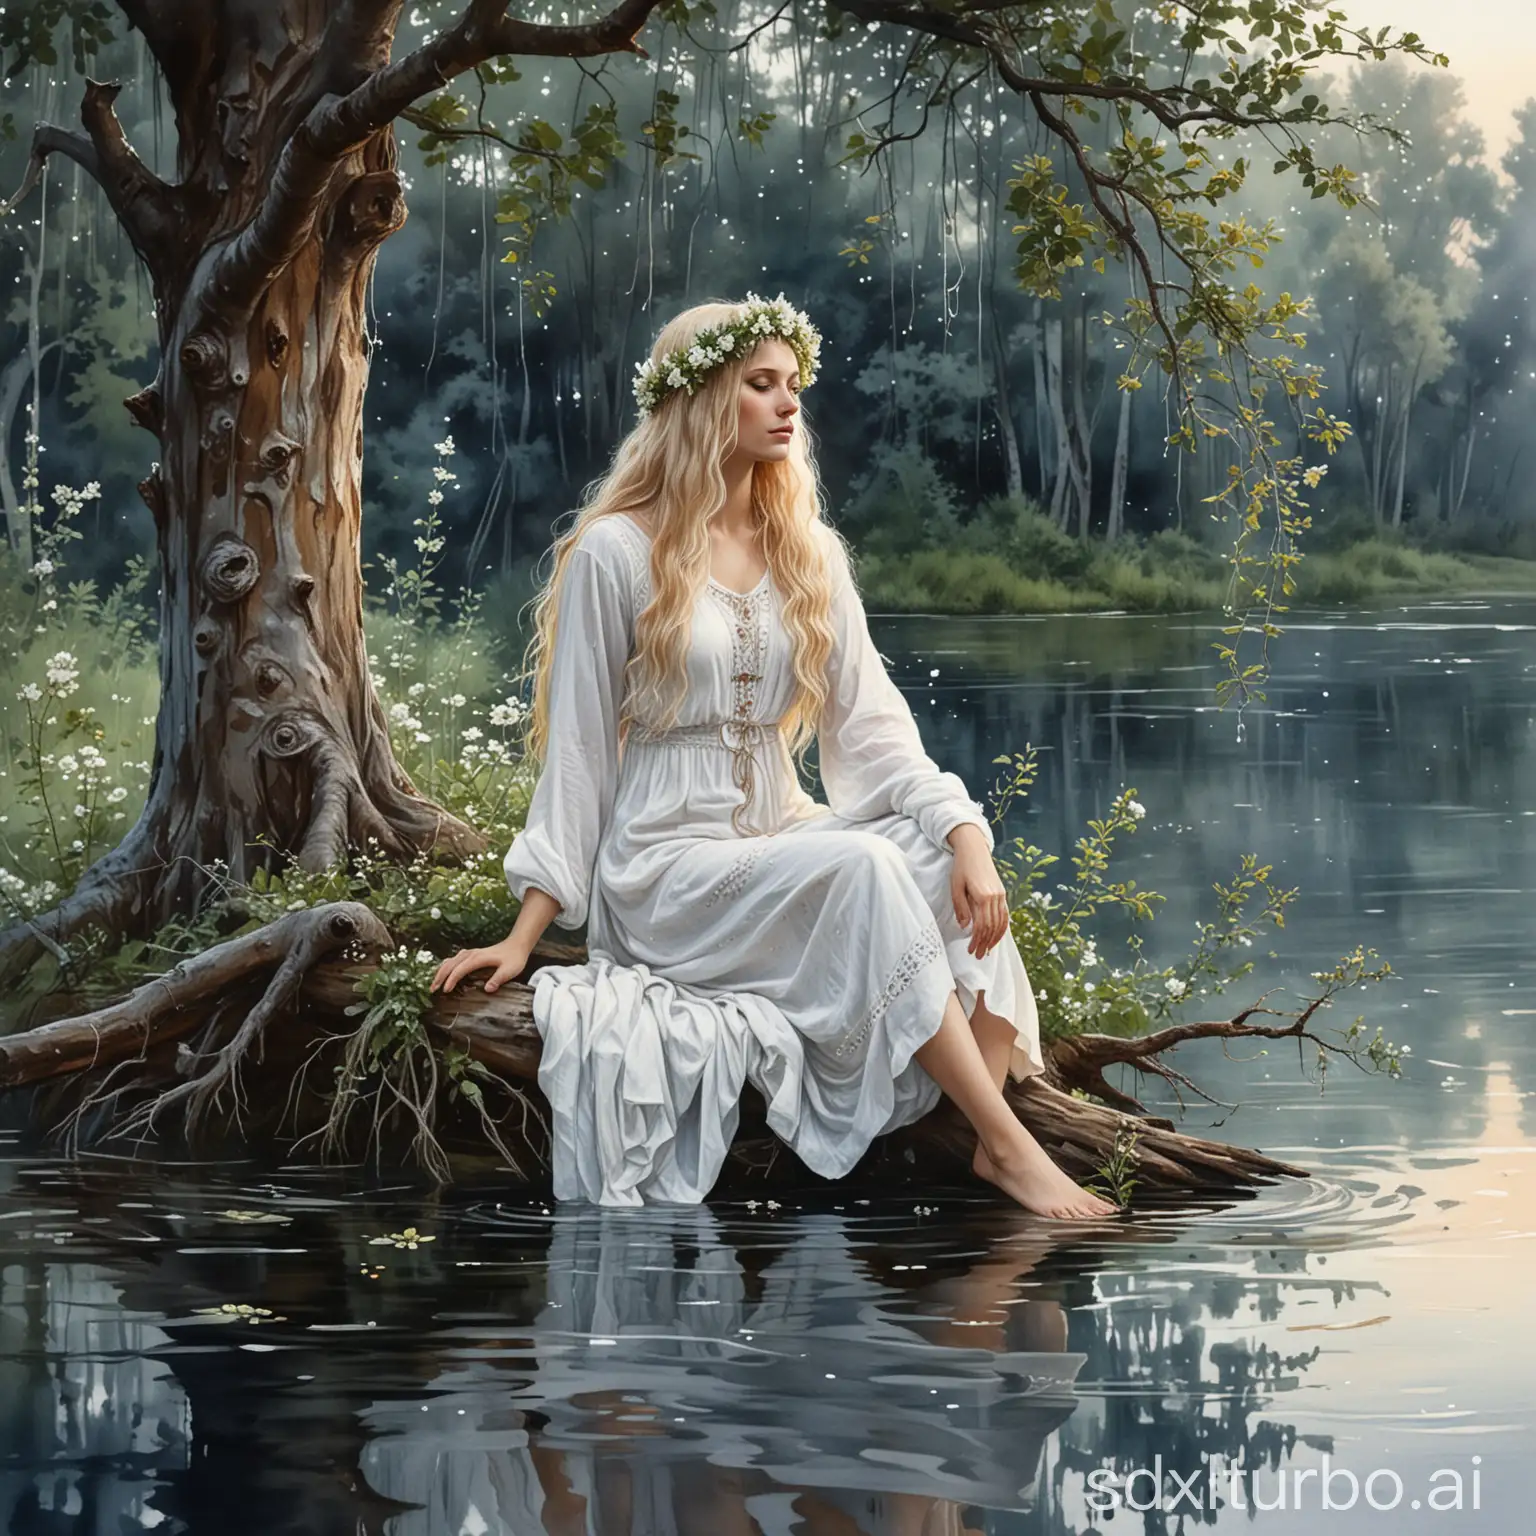 midsummer night aesthetics, dense russian forest, the stars reflected in the river waves, slavic river goddess wearing white linen folk undershirt dress in water with wet long blond hair and another slavic tree goddess with dark hair and flower wreath wearing white folk undershirt sitting on a tree branch, both are dangerous, aquarelle style, magical, silver pigment, watercolor drawing, fairytale